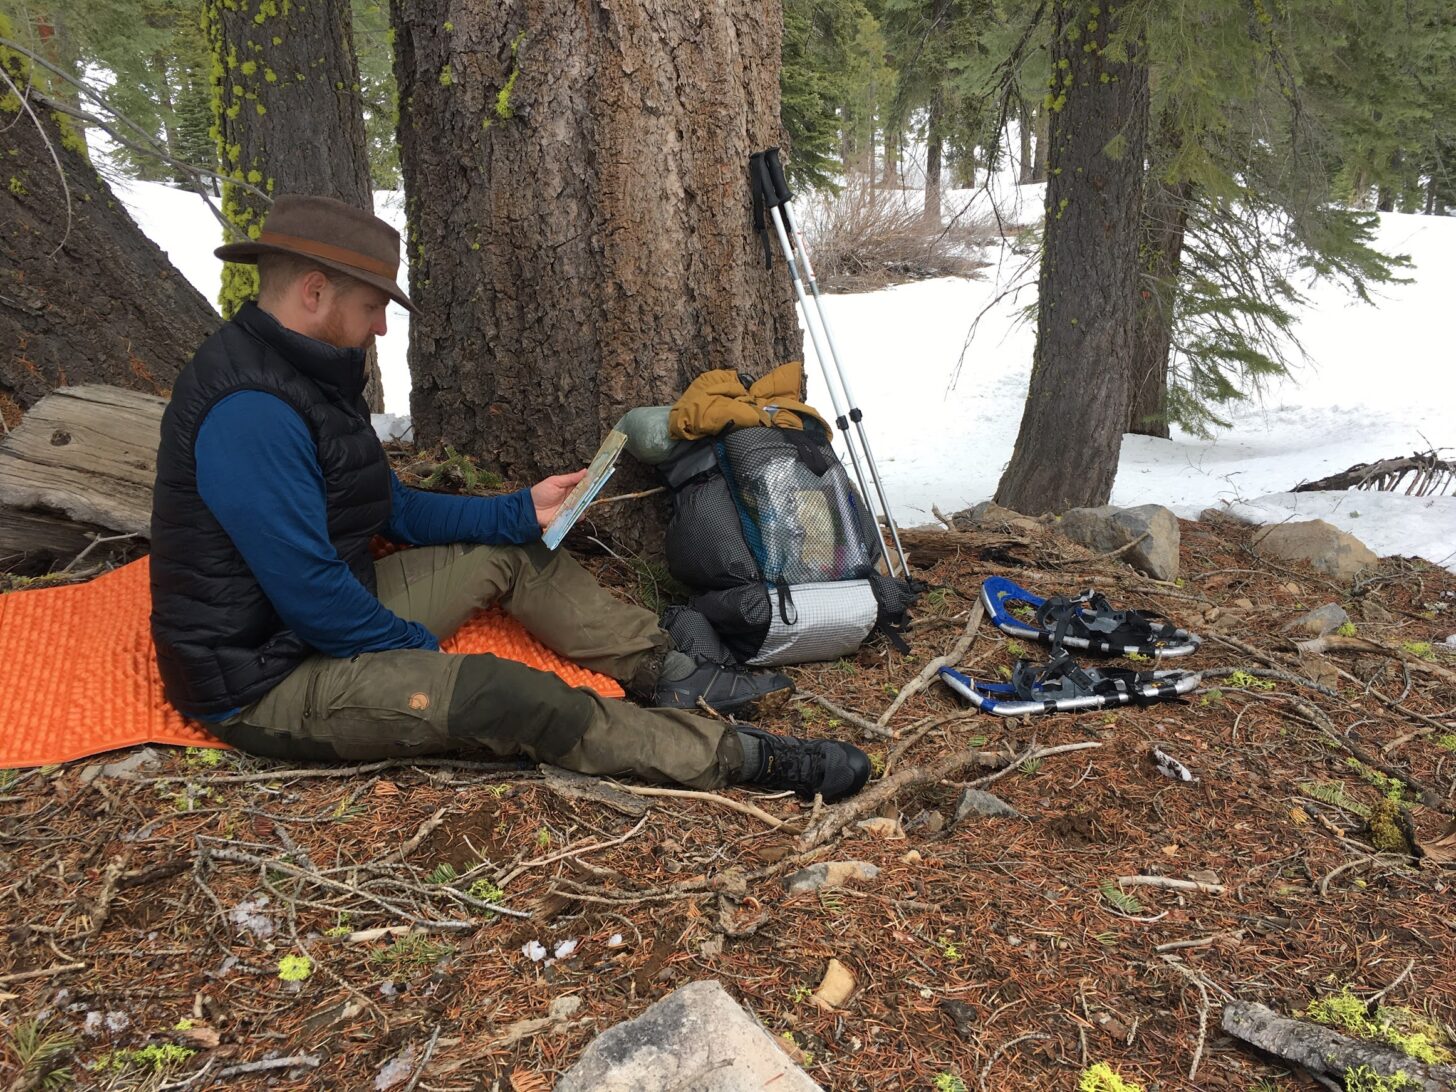 man reading a map while sitting on a foam sleeping mat, with backpack, trekking poles, and snowshoes nearby